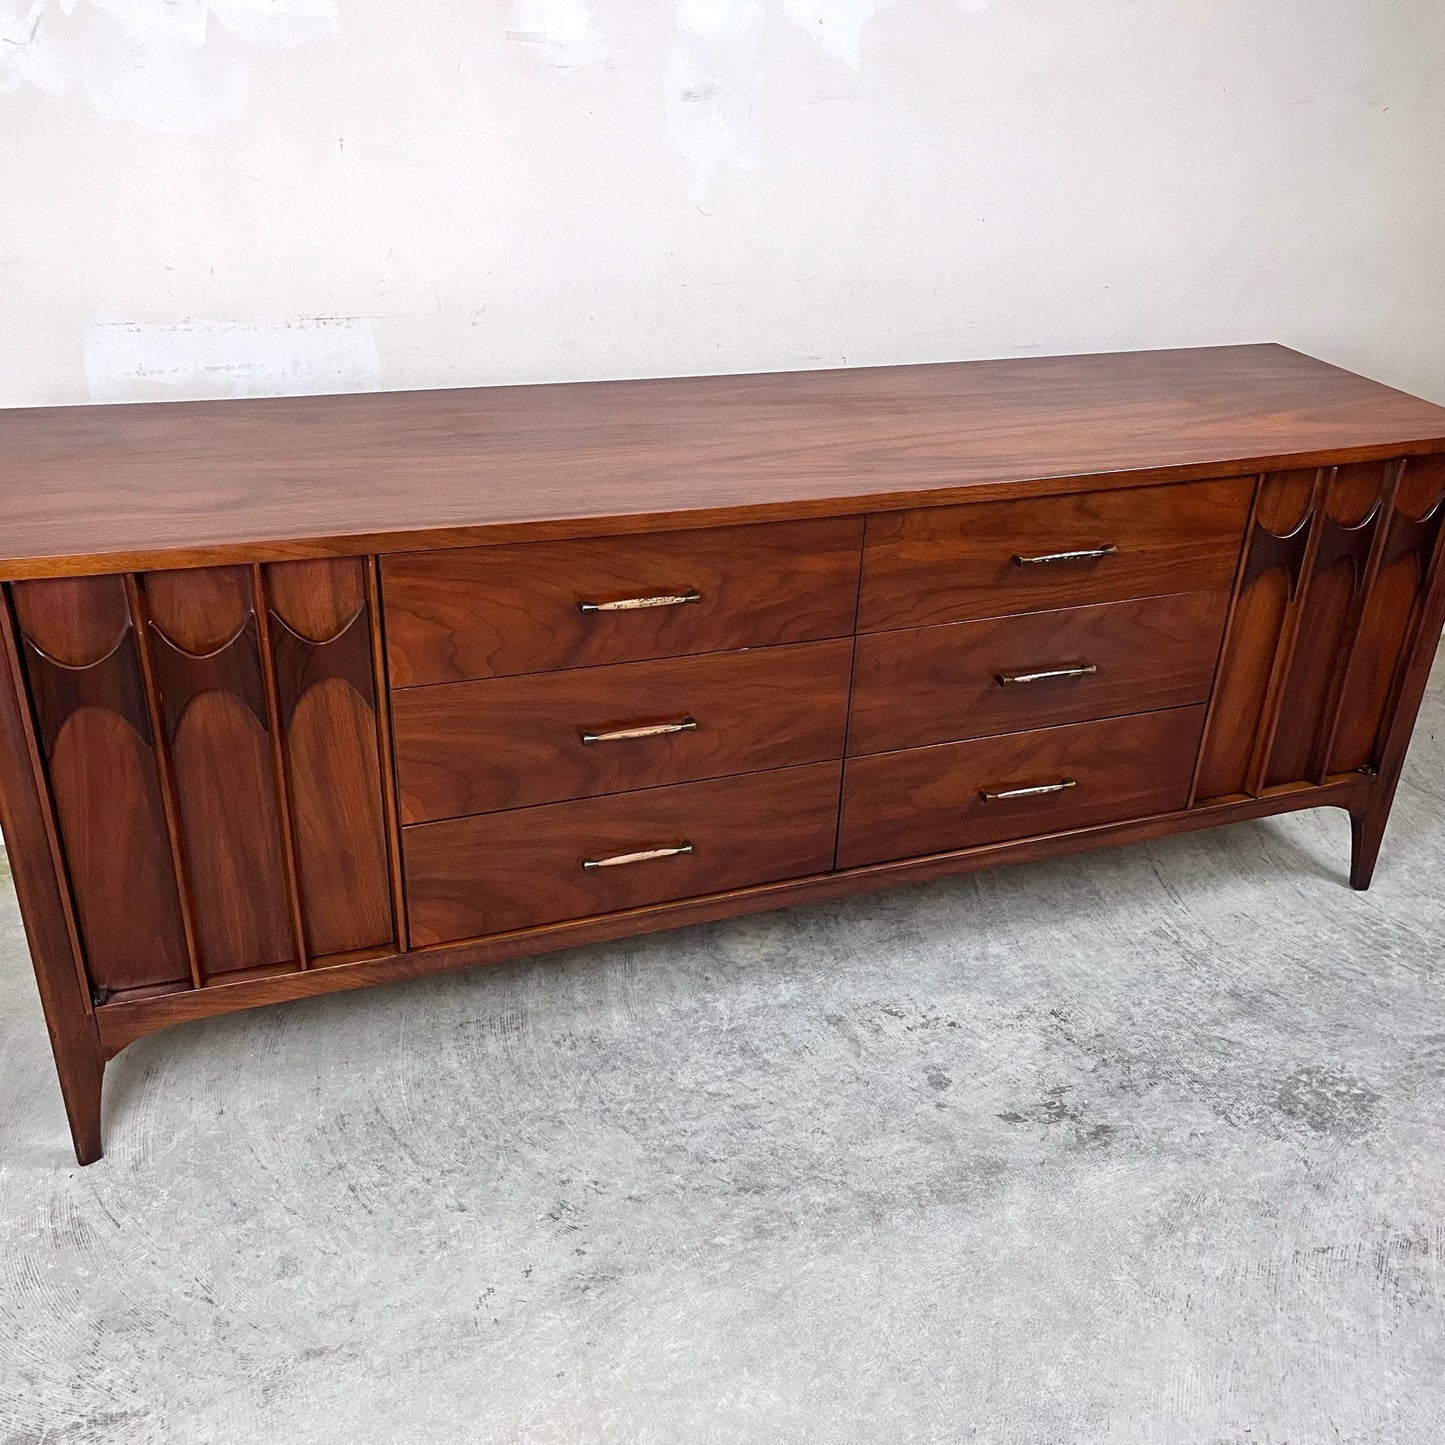 Walnut woodgrain Kent Coffey Perspecta dresser with brass and wooden accents